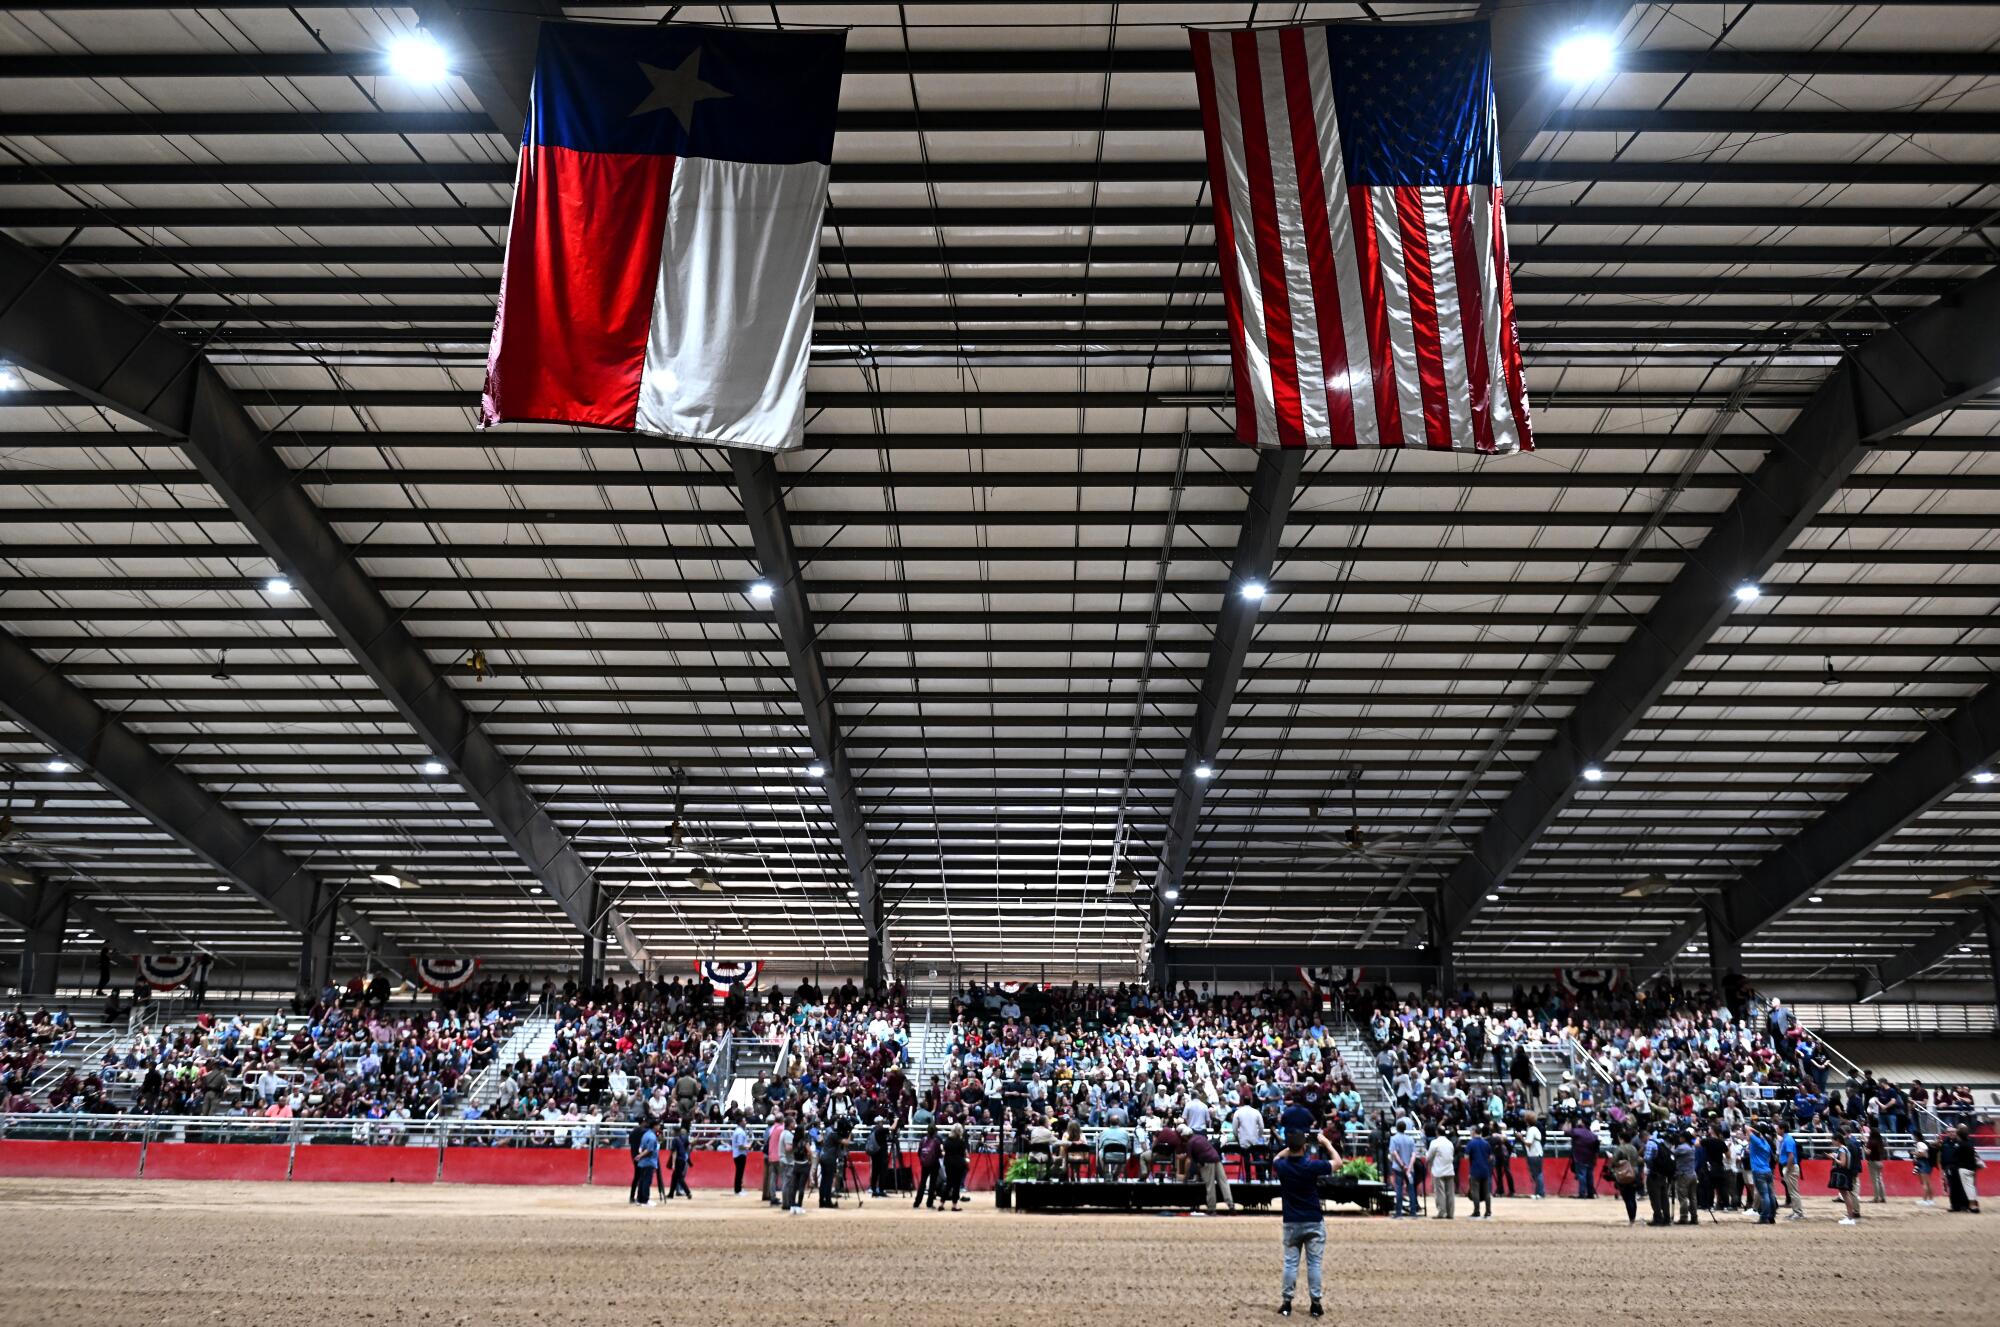 Crowds seated indoors in the bleachers under a blue, red and white flag and the U.S. flag 